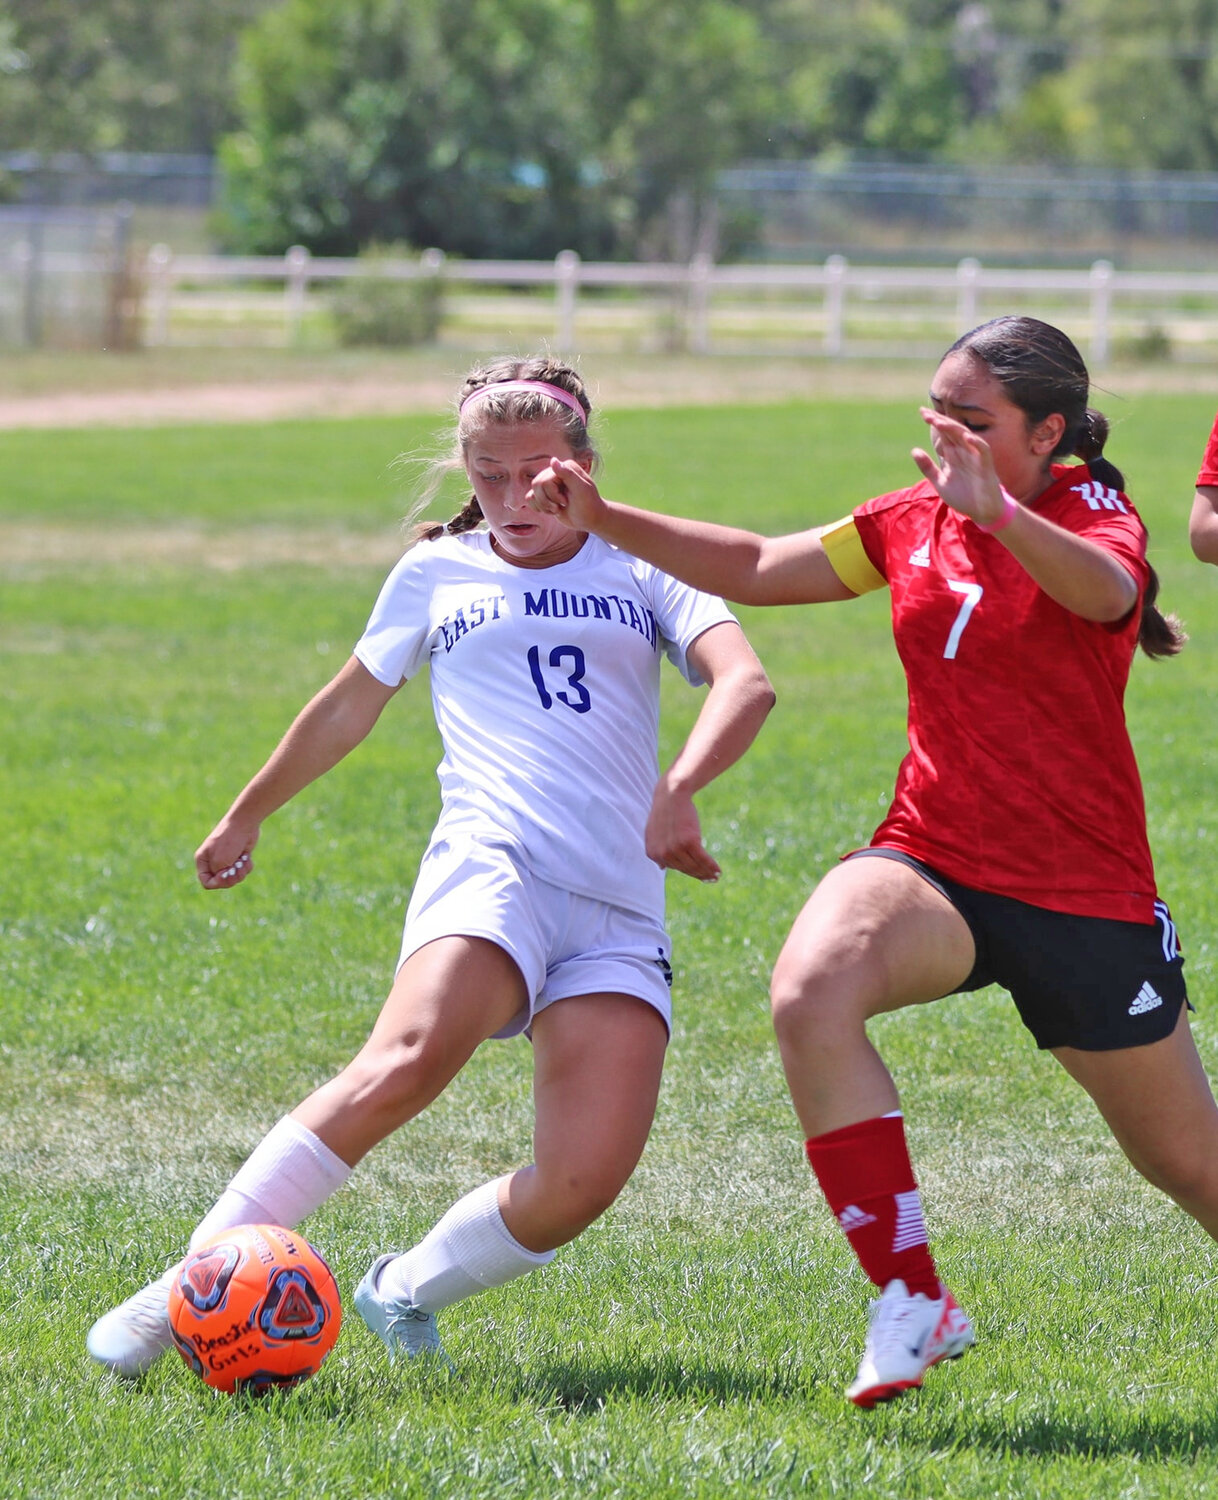 East Mountain's Rylee Hyde battles for the ball against Robertson in game last week that the Timberwolves won 4-1.